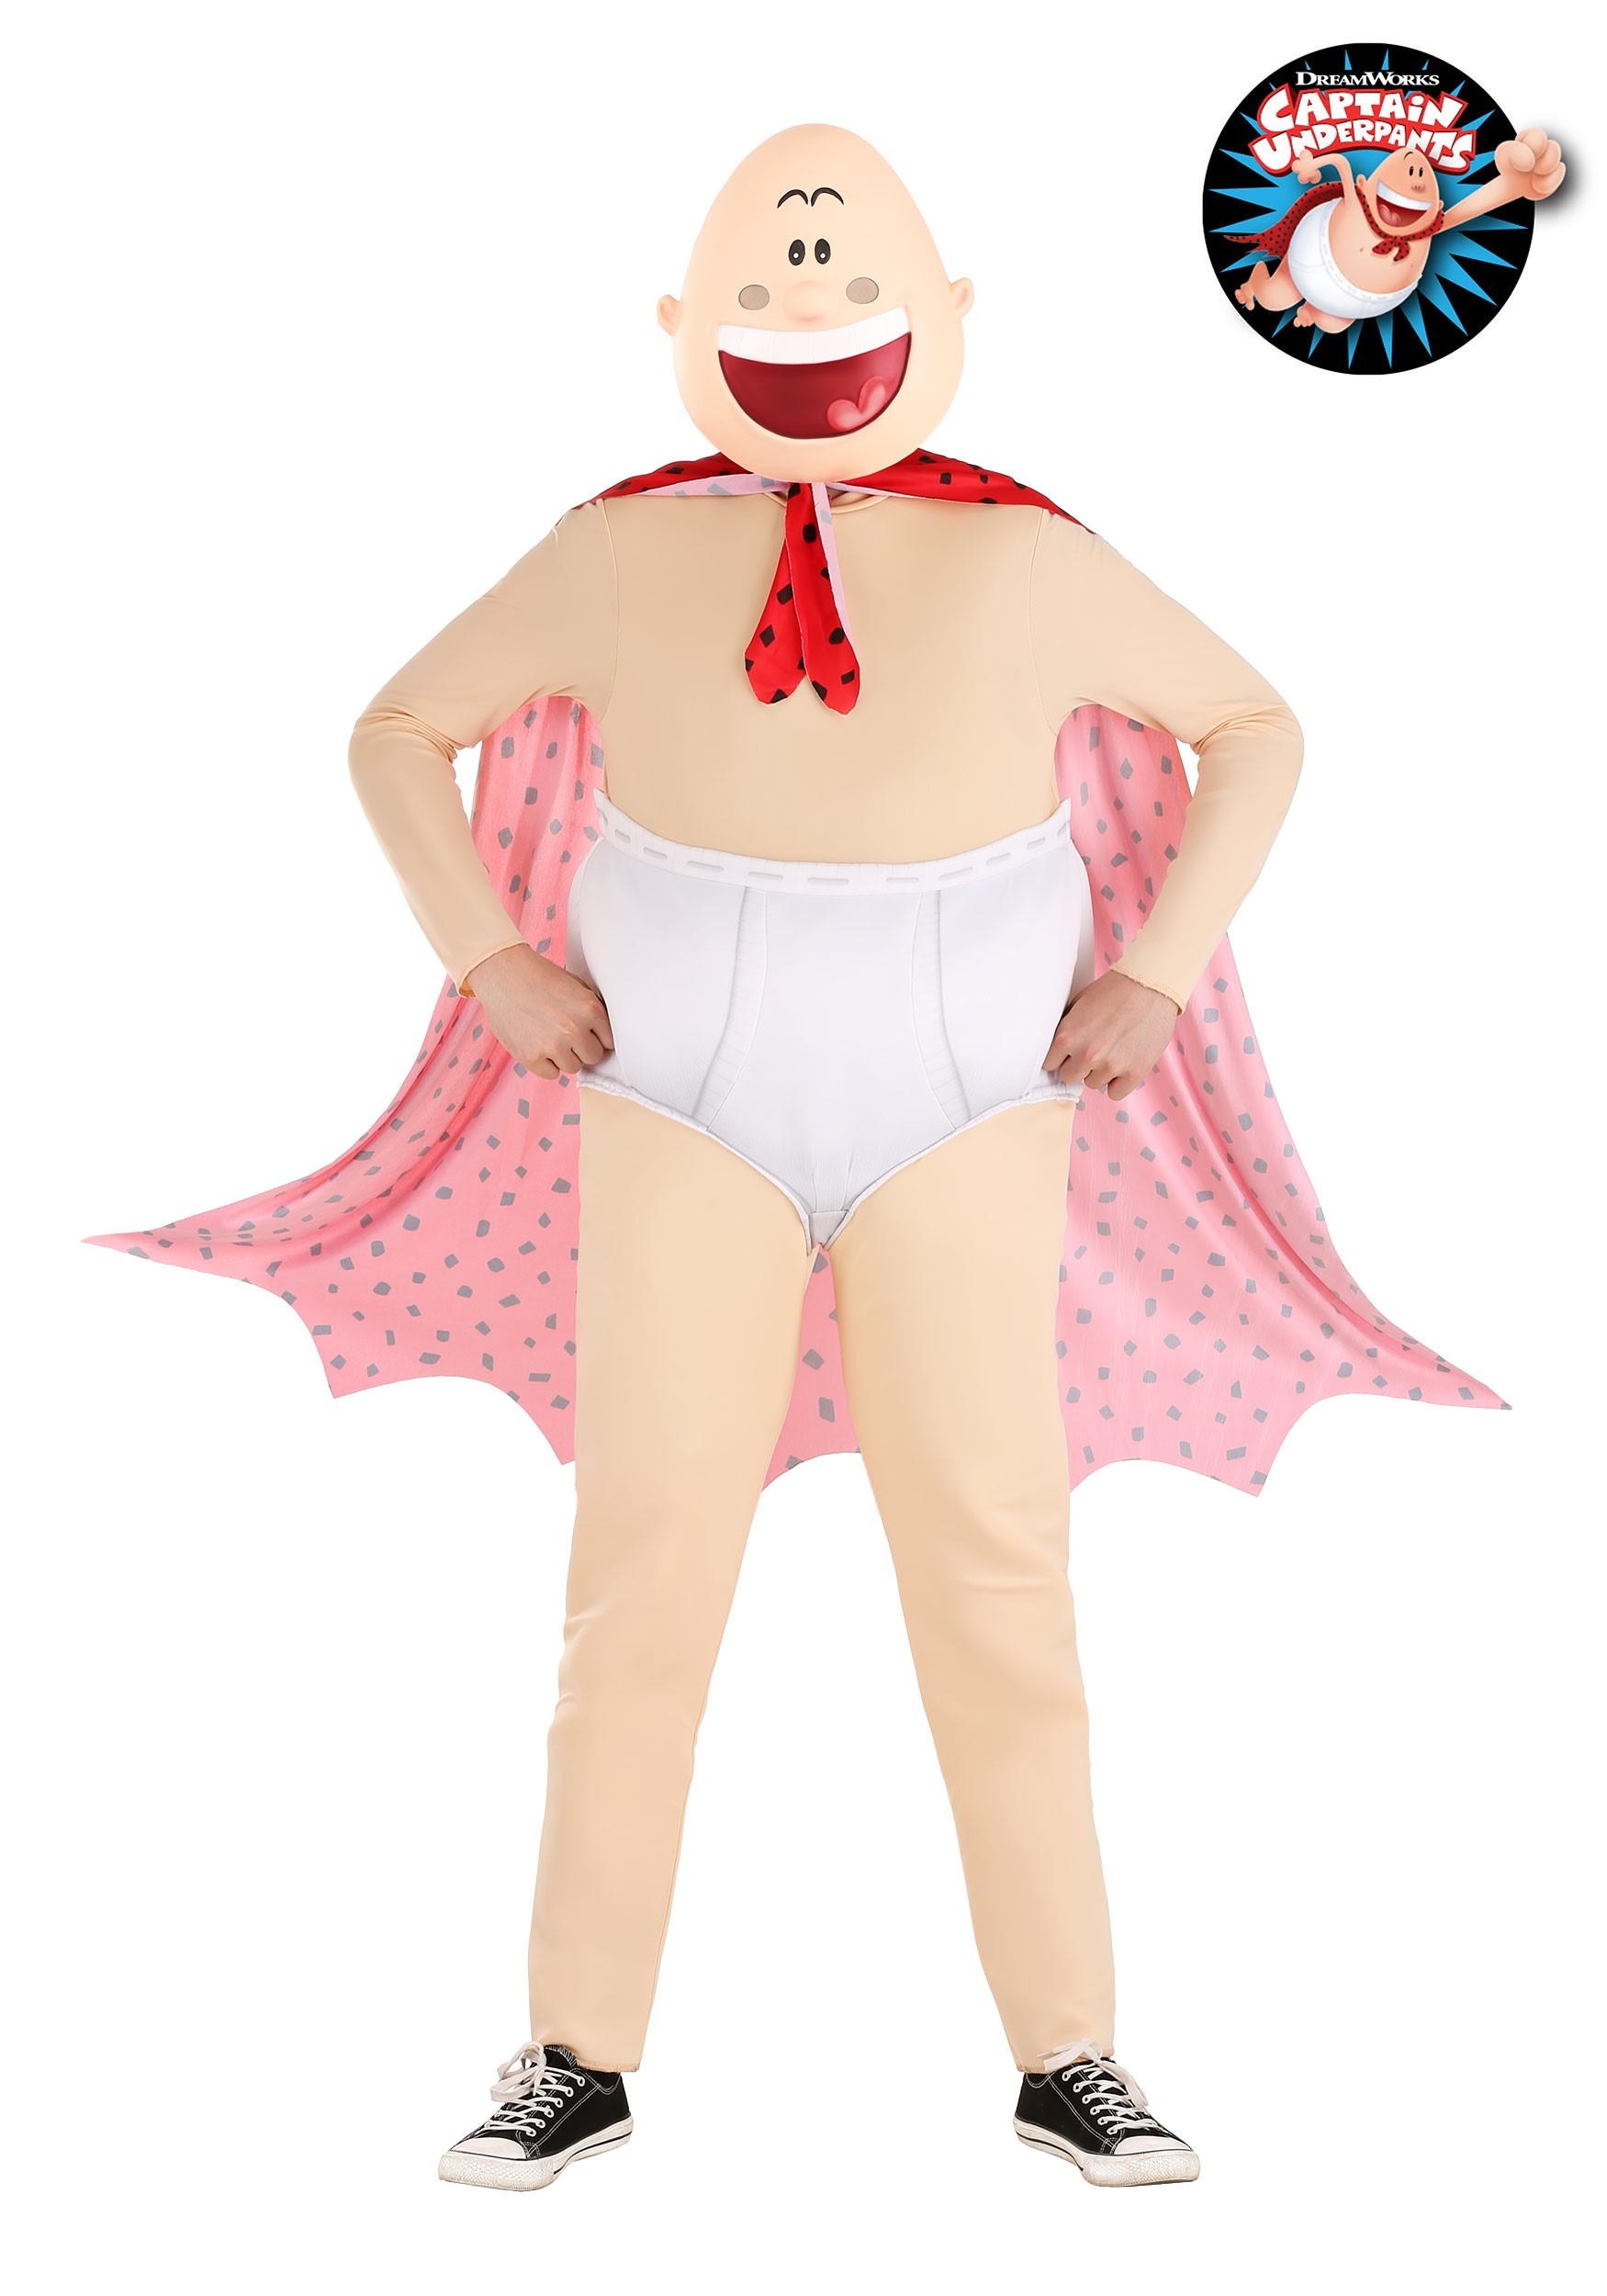 https://images.halloweencostumes.ca/products/69107/1-1/captain-underpants-adult-costume.jpg